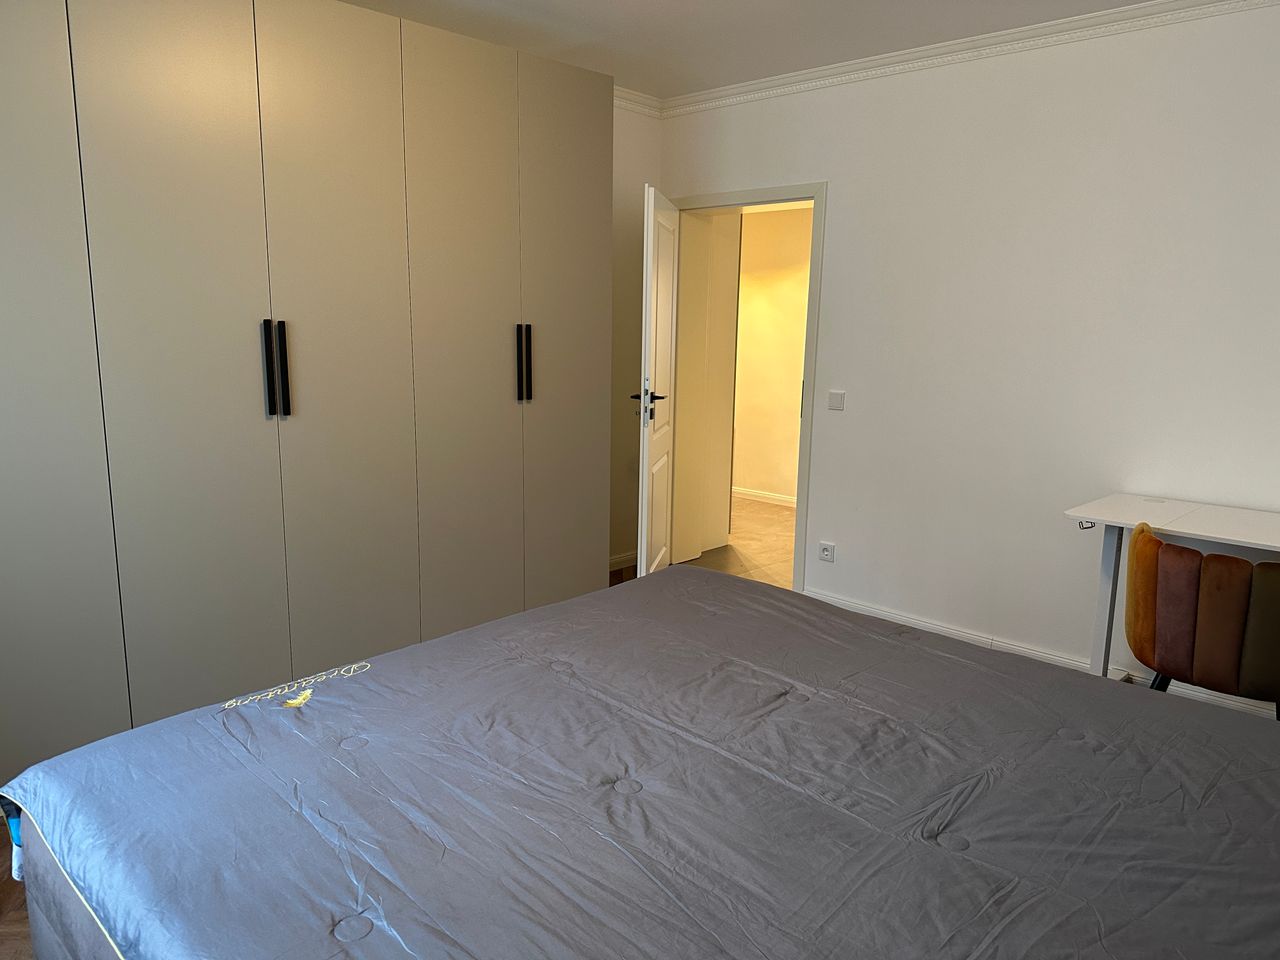 Highend furnished  2-room apartment in the heart of Frankfurt (Holzhausenviertel) - first occupancy after core renovation